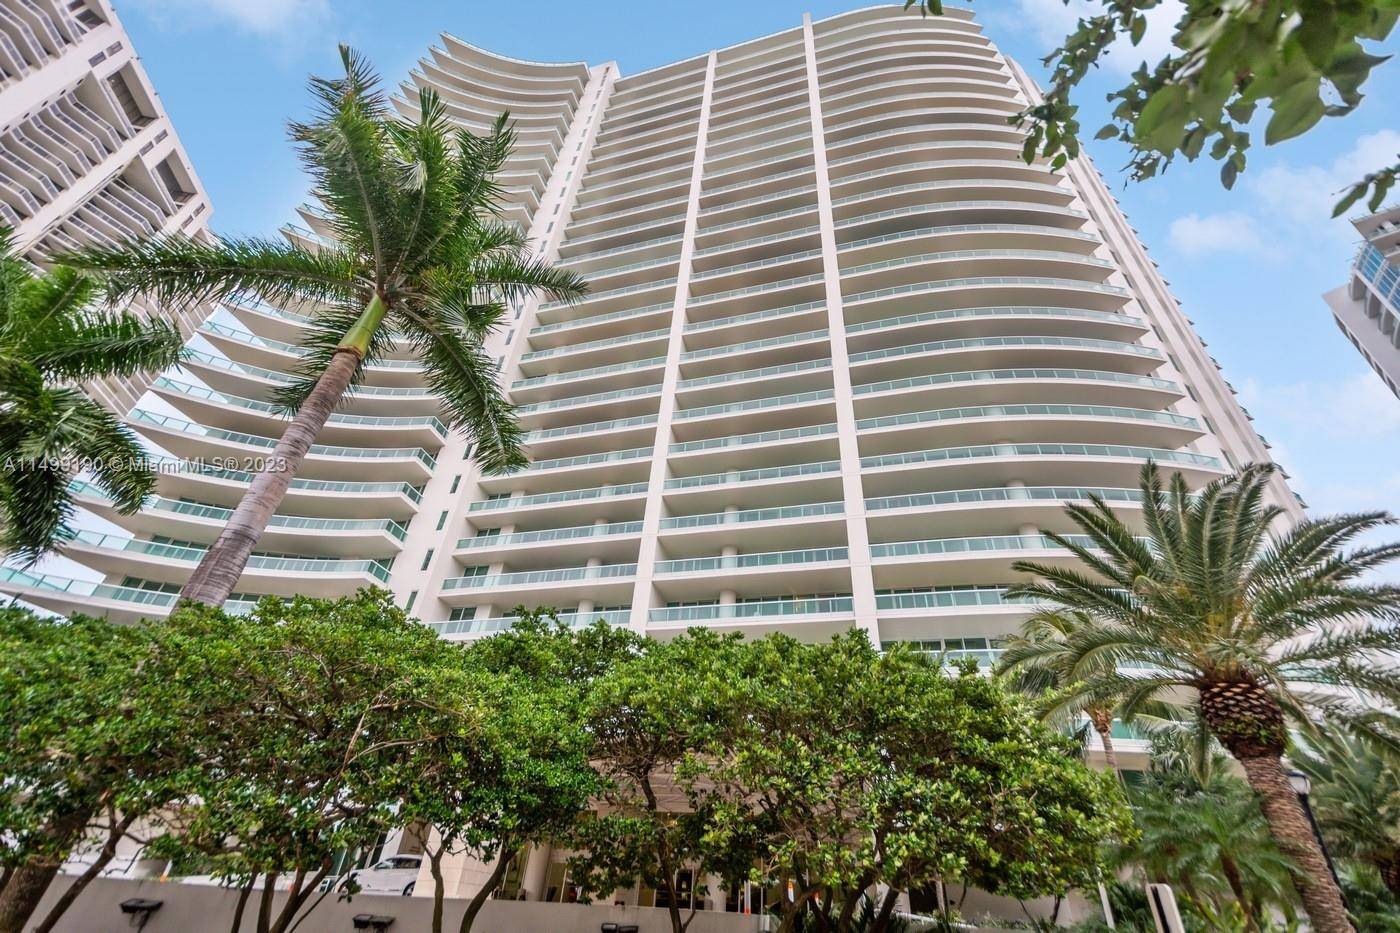 Rarely available Penthouse with12 foot ceilings and floor to ceiling windows with spacious, elegant living areas, and stunning Ocean and Intercoastal views.